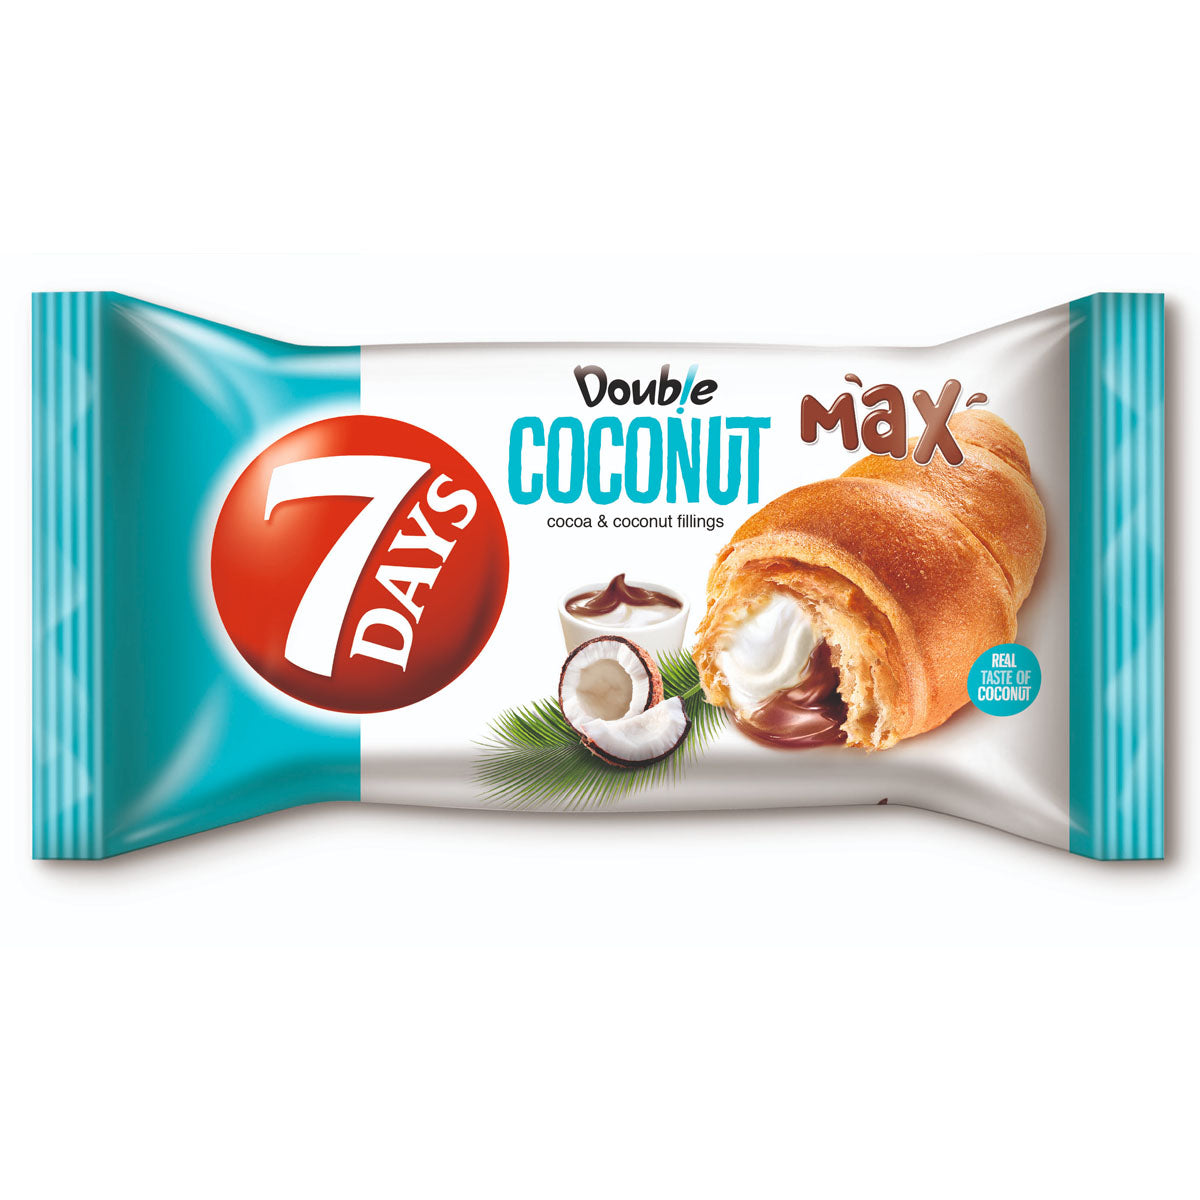 7 Days - Double Cocoa & Coconut Croissant - 80g - Continental Food Store